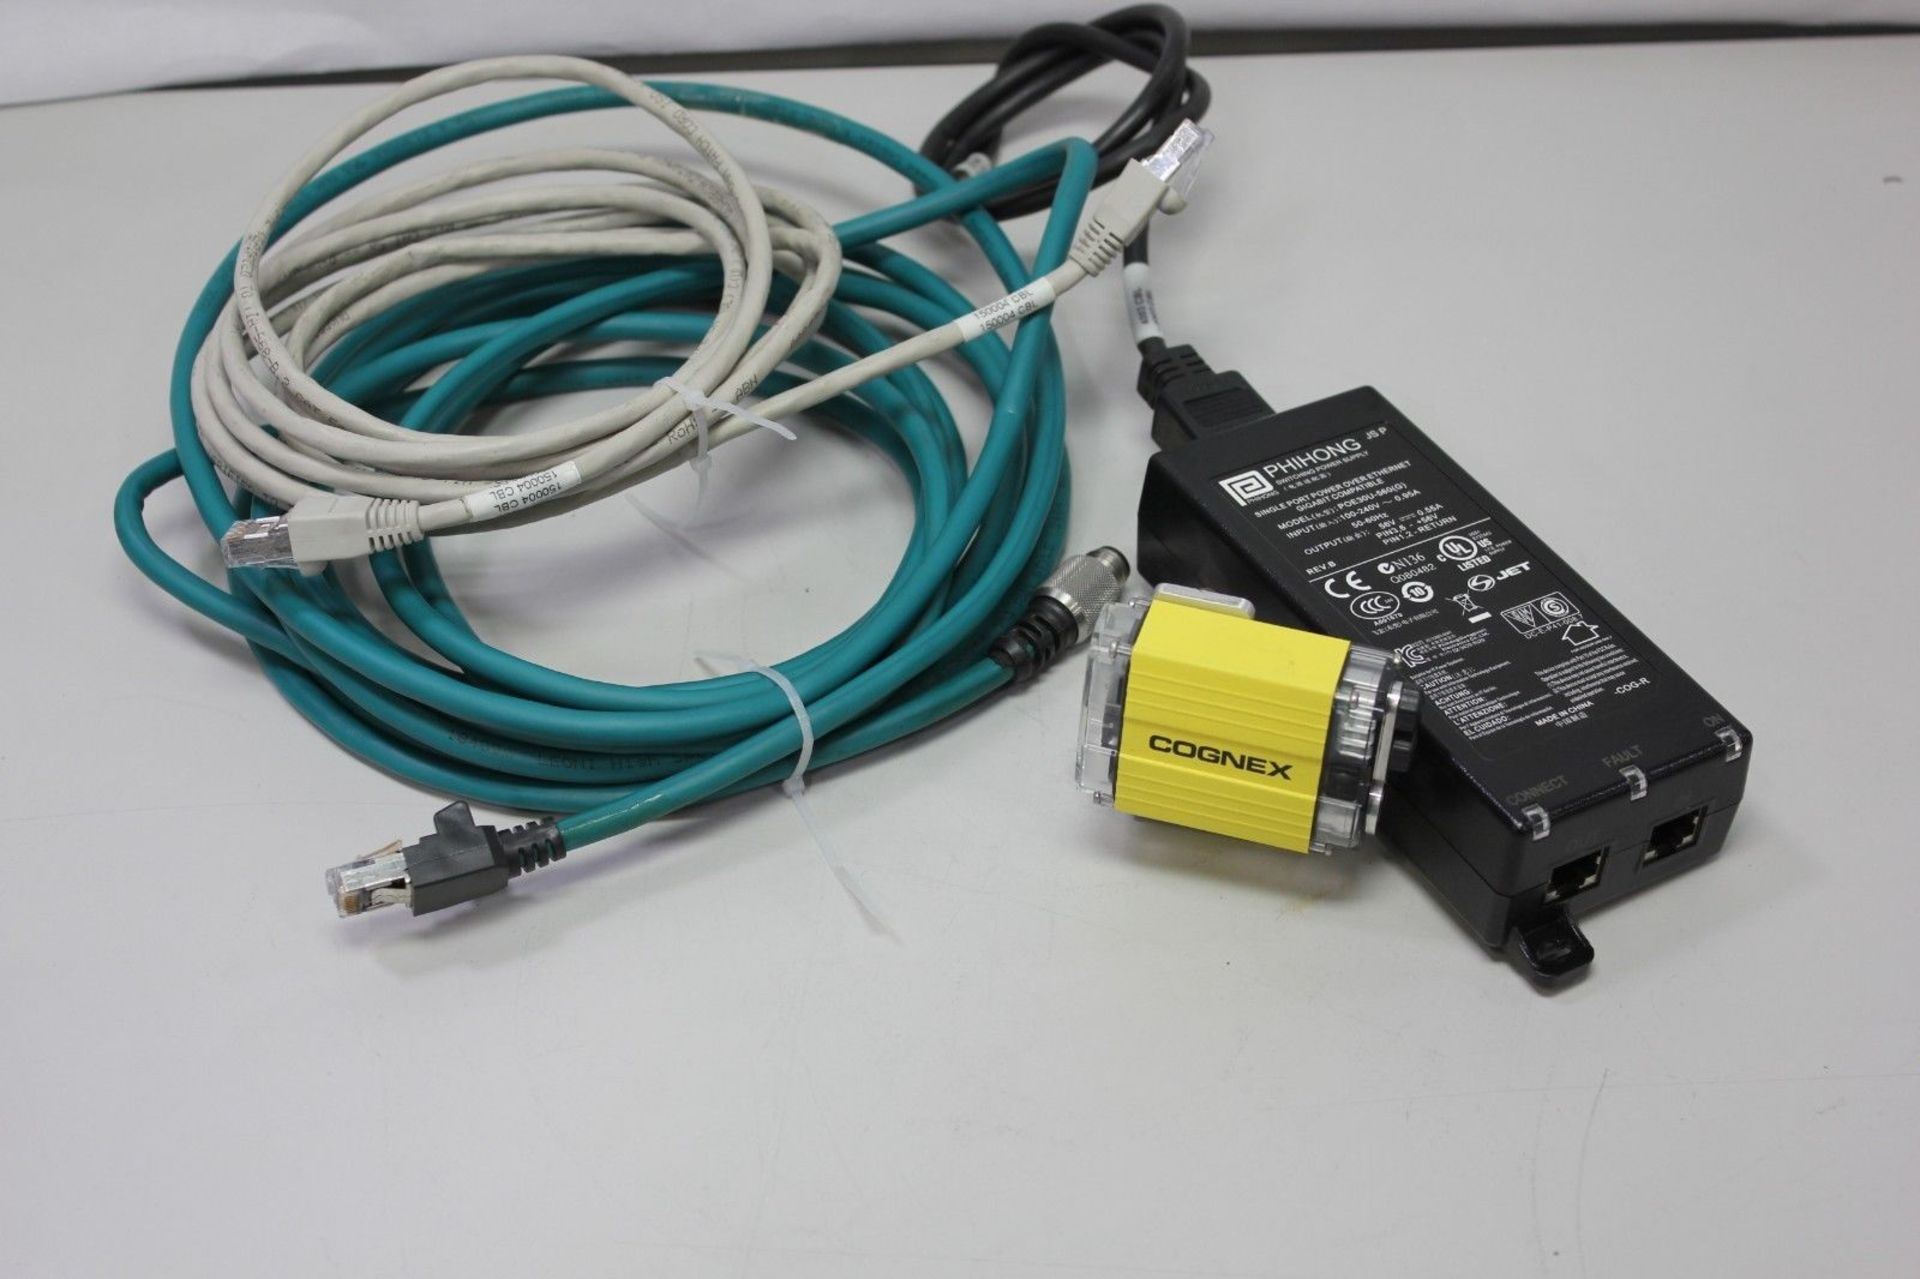 Cognex Dataman DM200S 825-0097-1R Scanner Barcode Reader With Power Supply & Connecting cables - Image 2 of 6